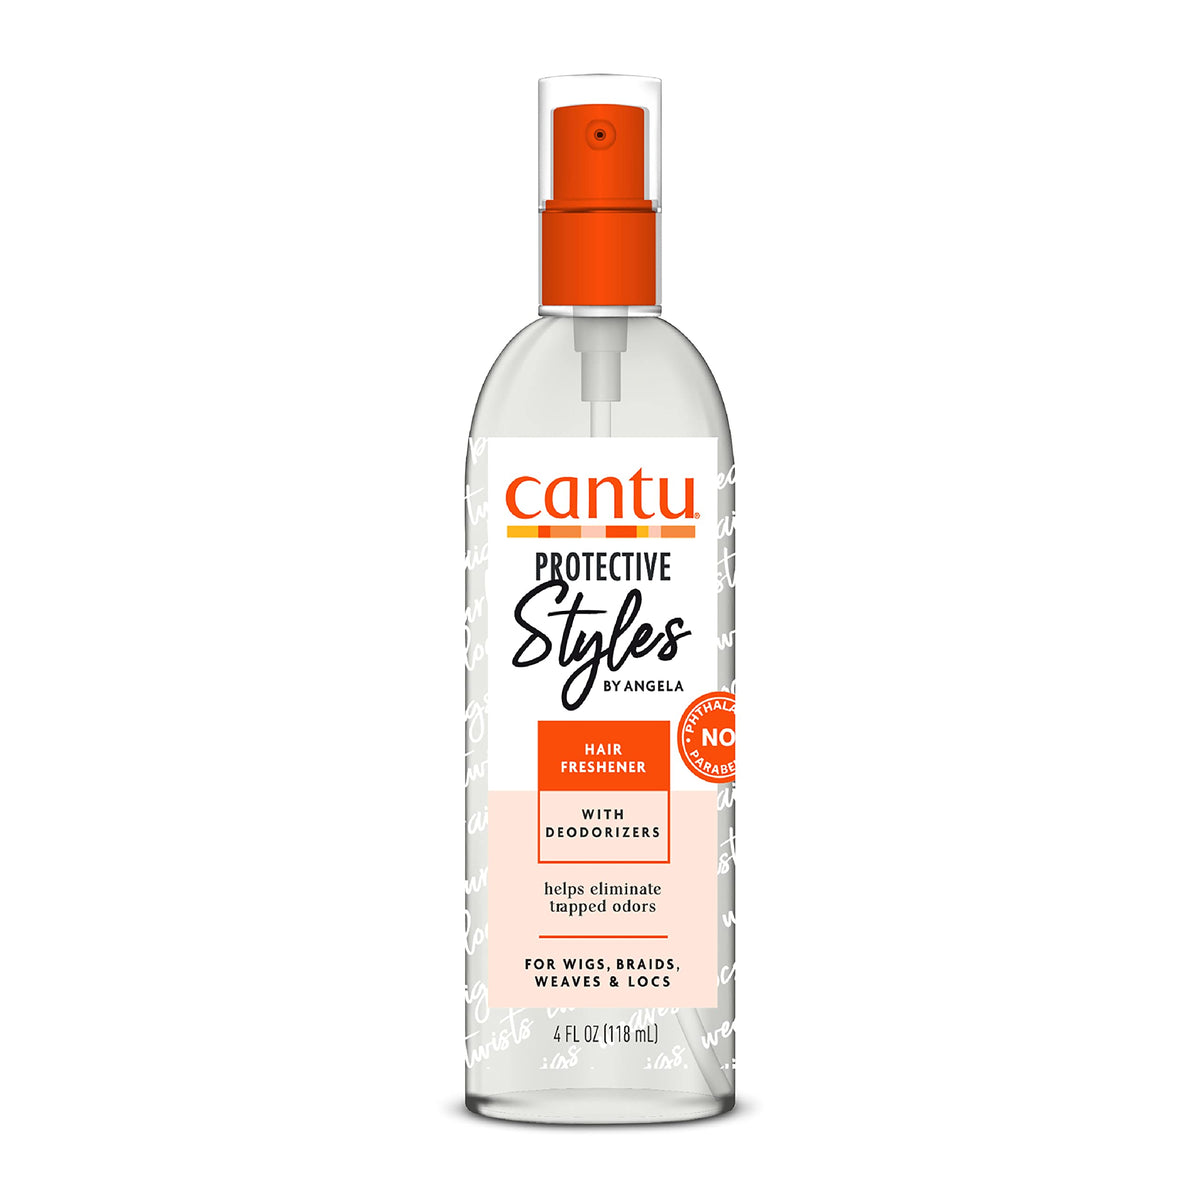 Cantu Protective Styles by Angela Hair Freshener with Deodorizers -118ml